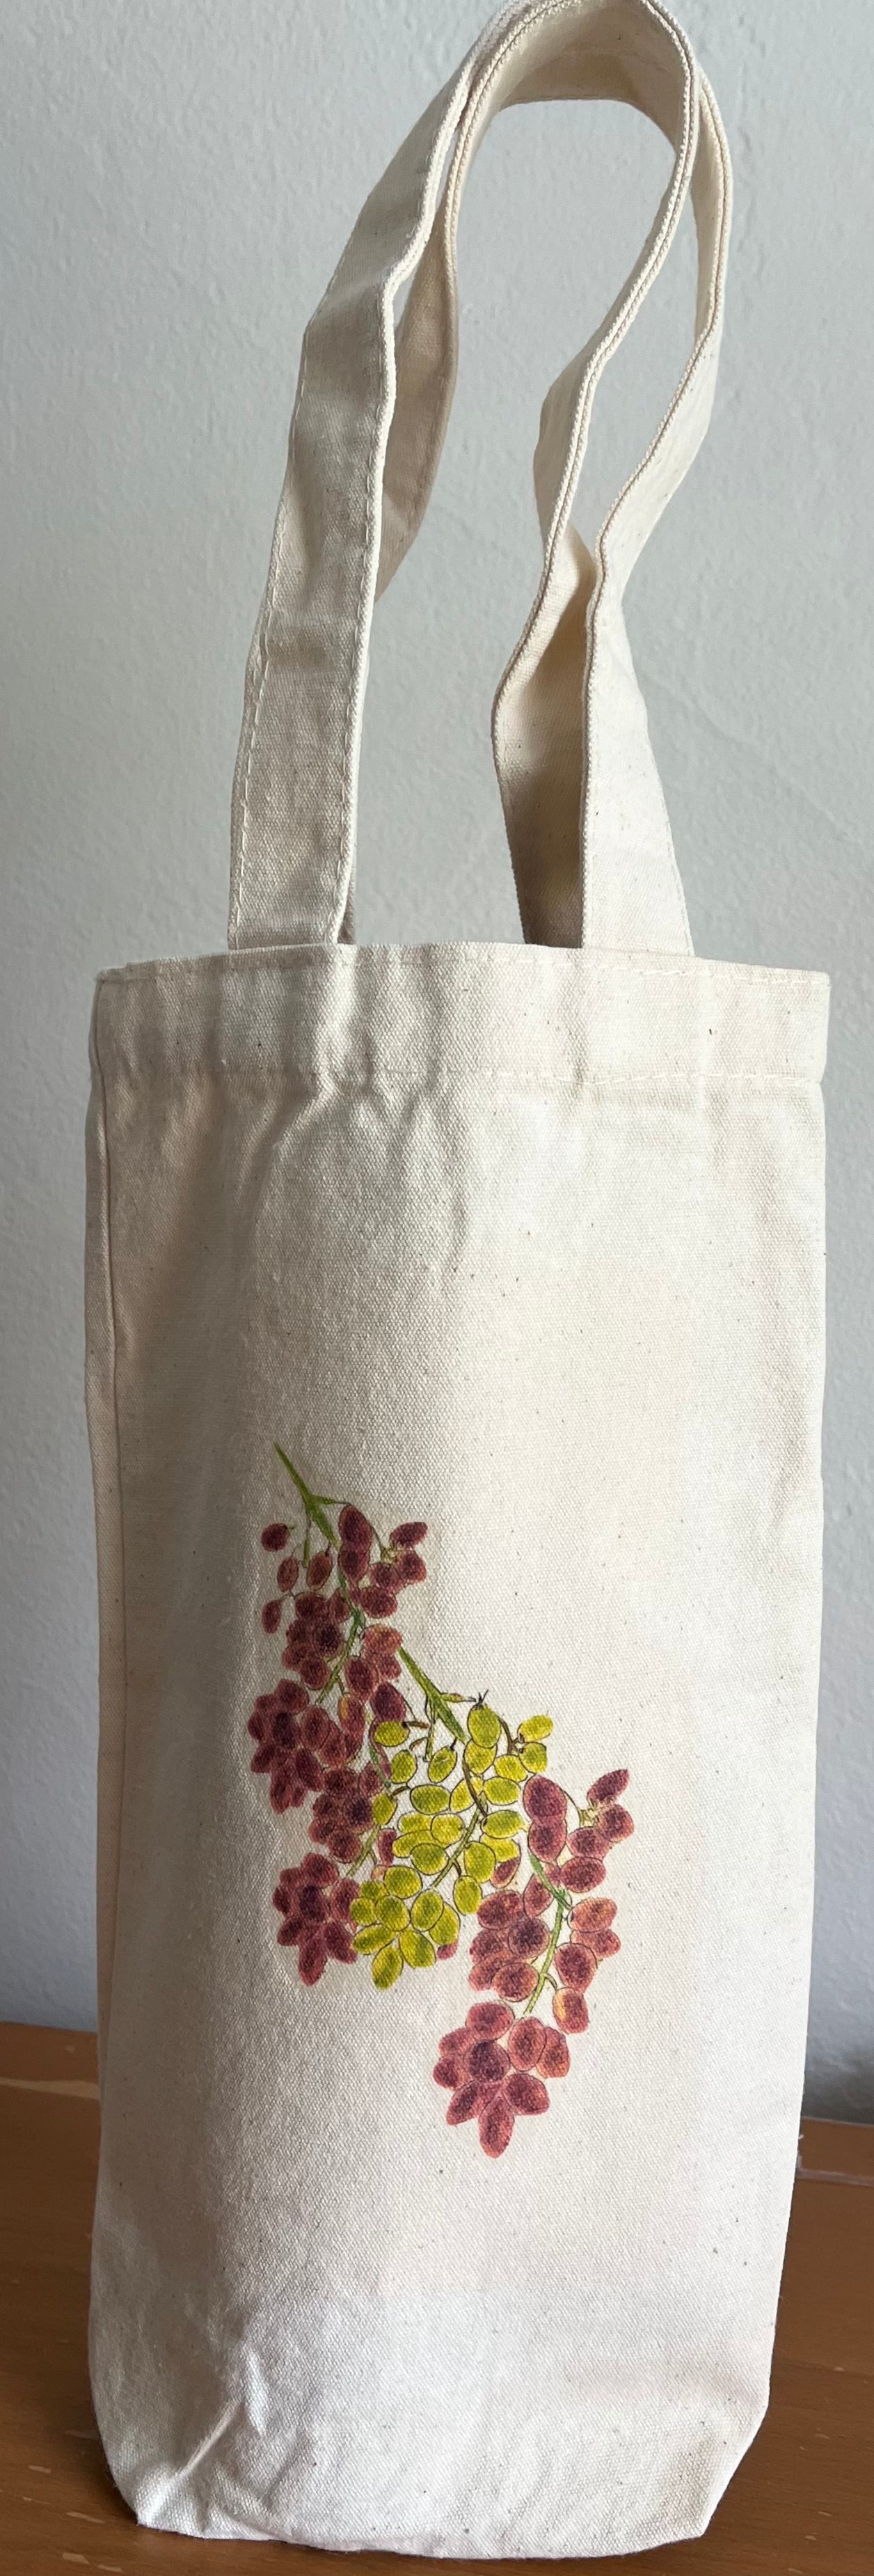 Red Grapes White Grapes Wine Tote Bag with Gift Card